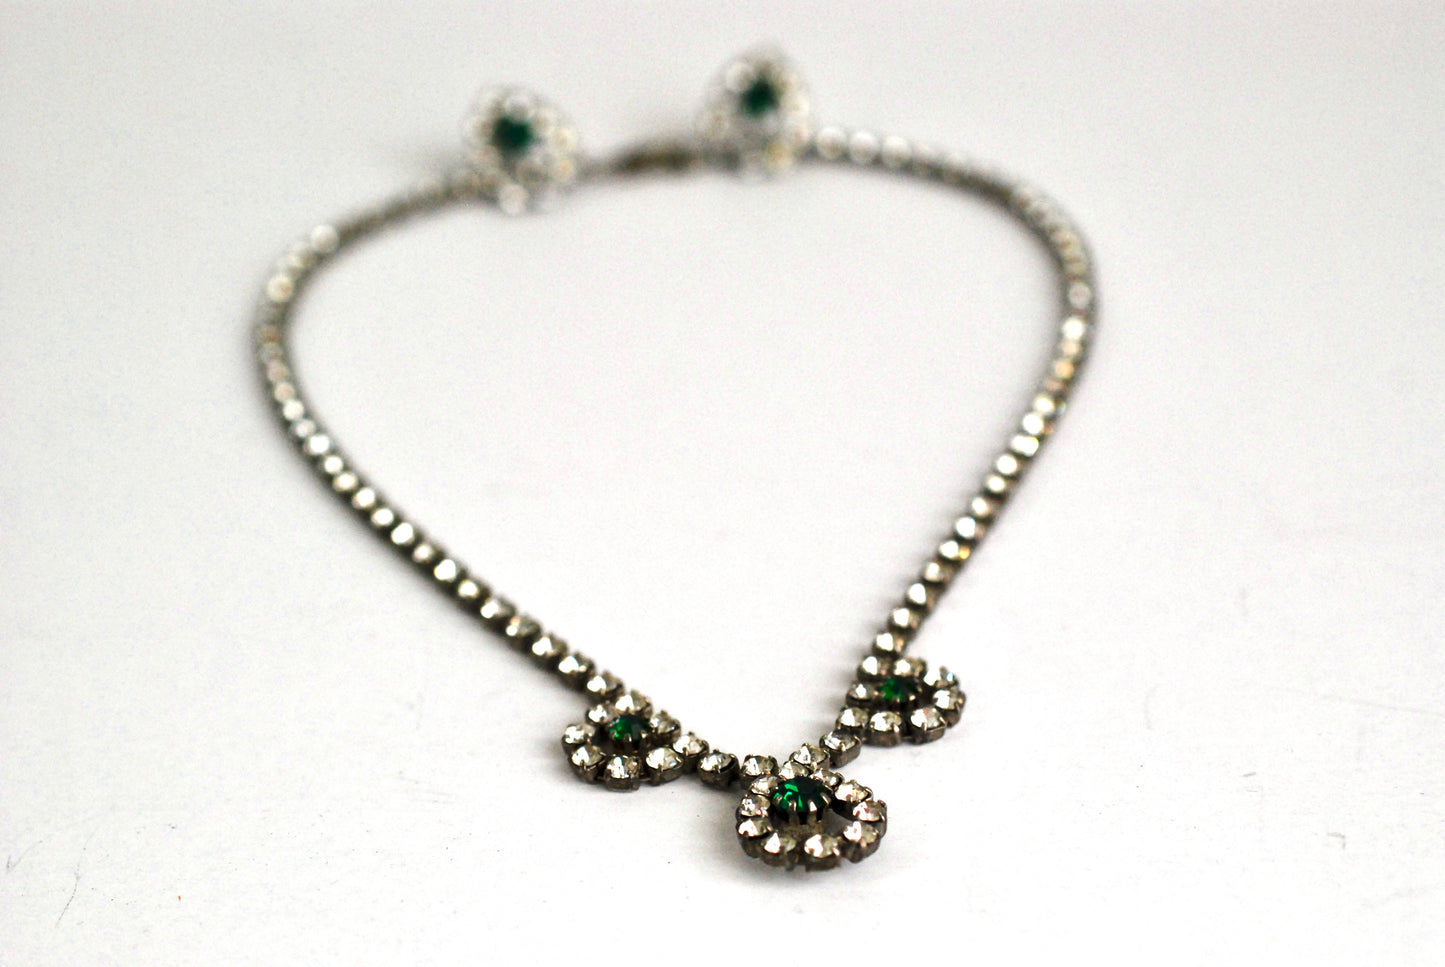 Rhinestone Necklace and Earrings in Clear and Green